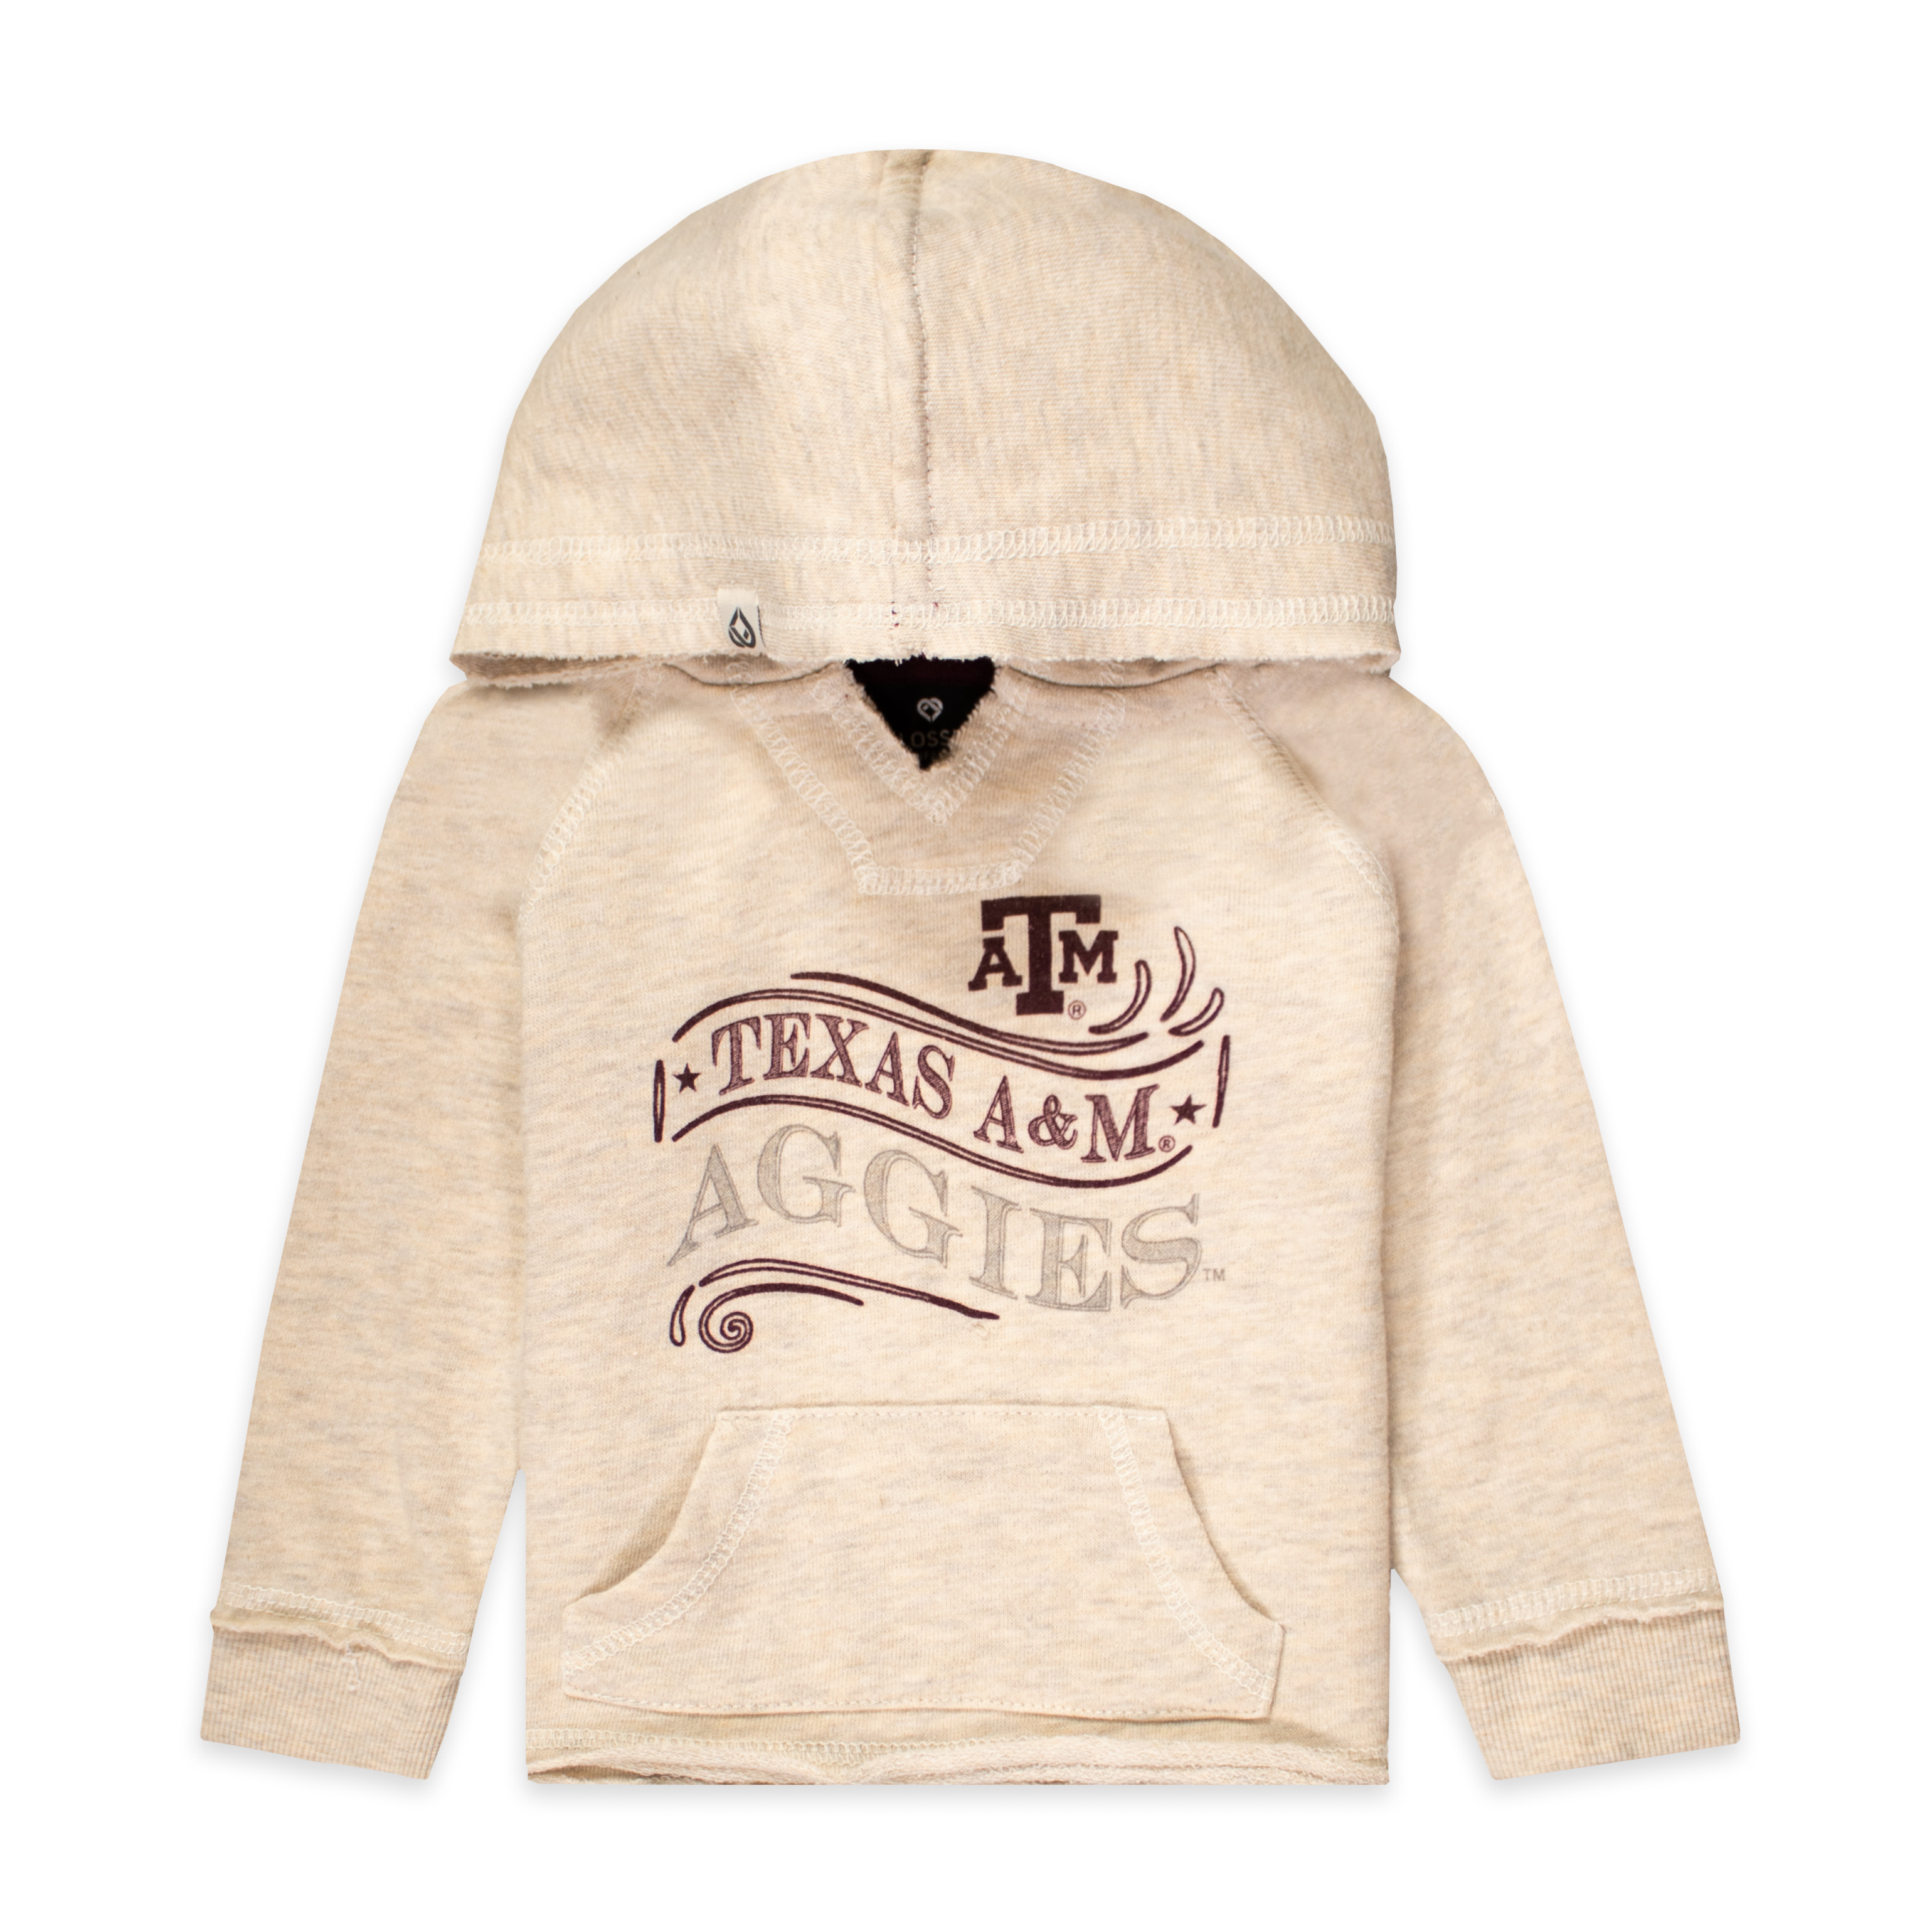 cream colored hoodie